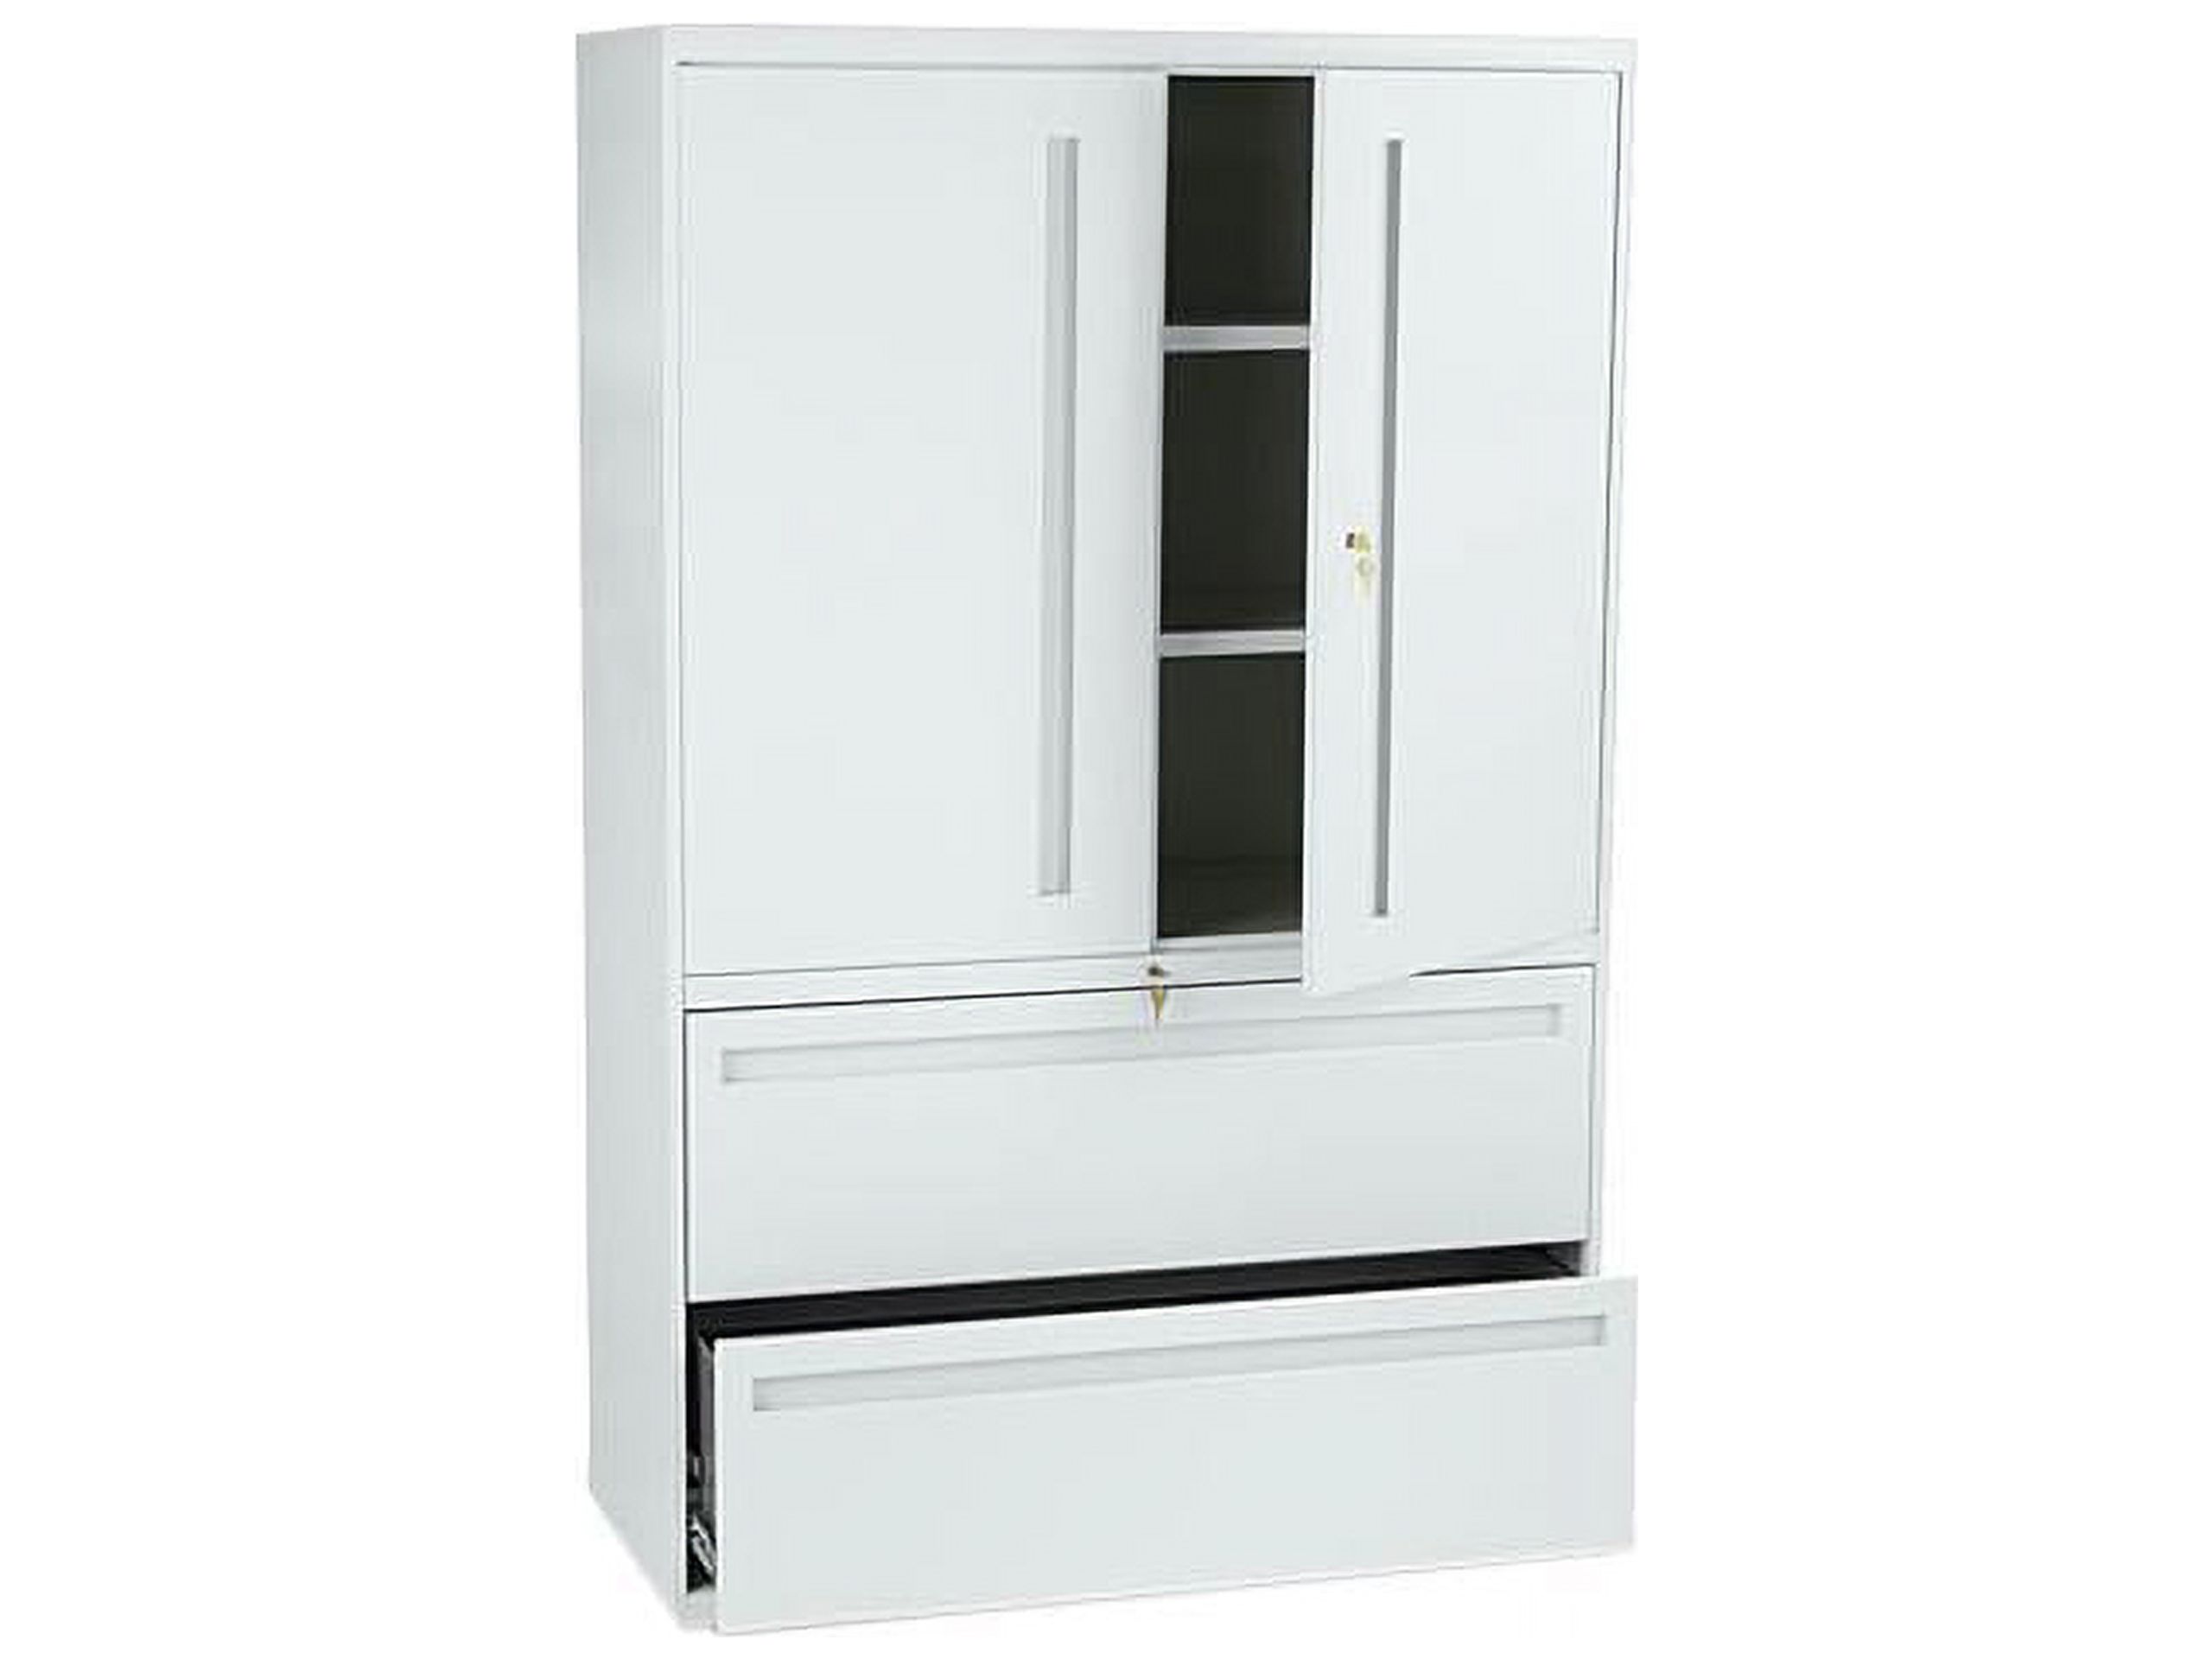 2 Drawers Lateral Lockable Filing Cabinet, Gray - image 1 of 2